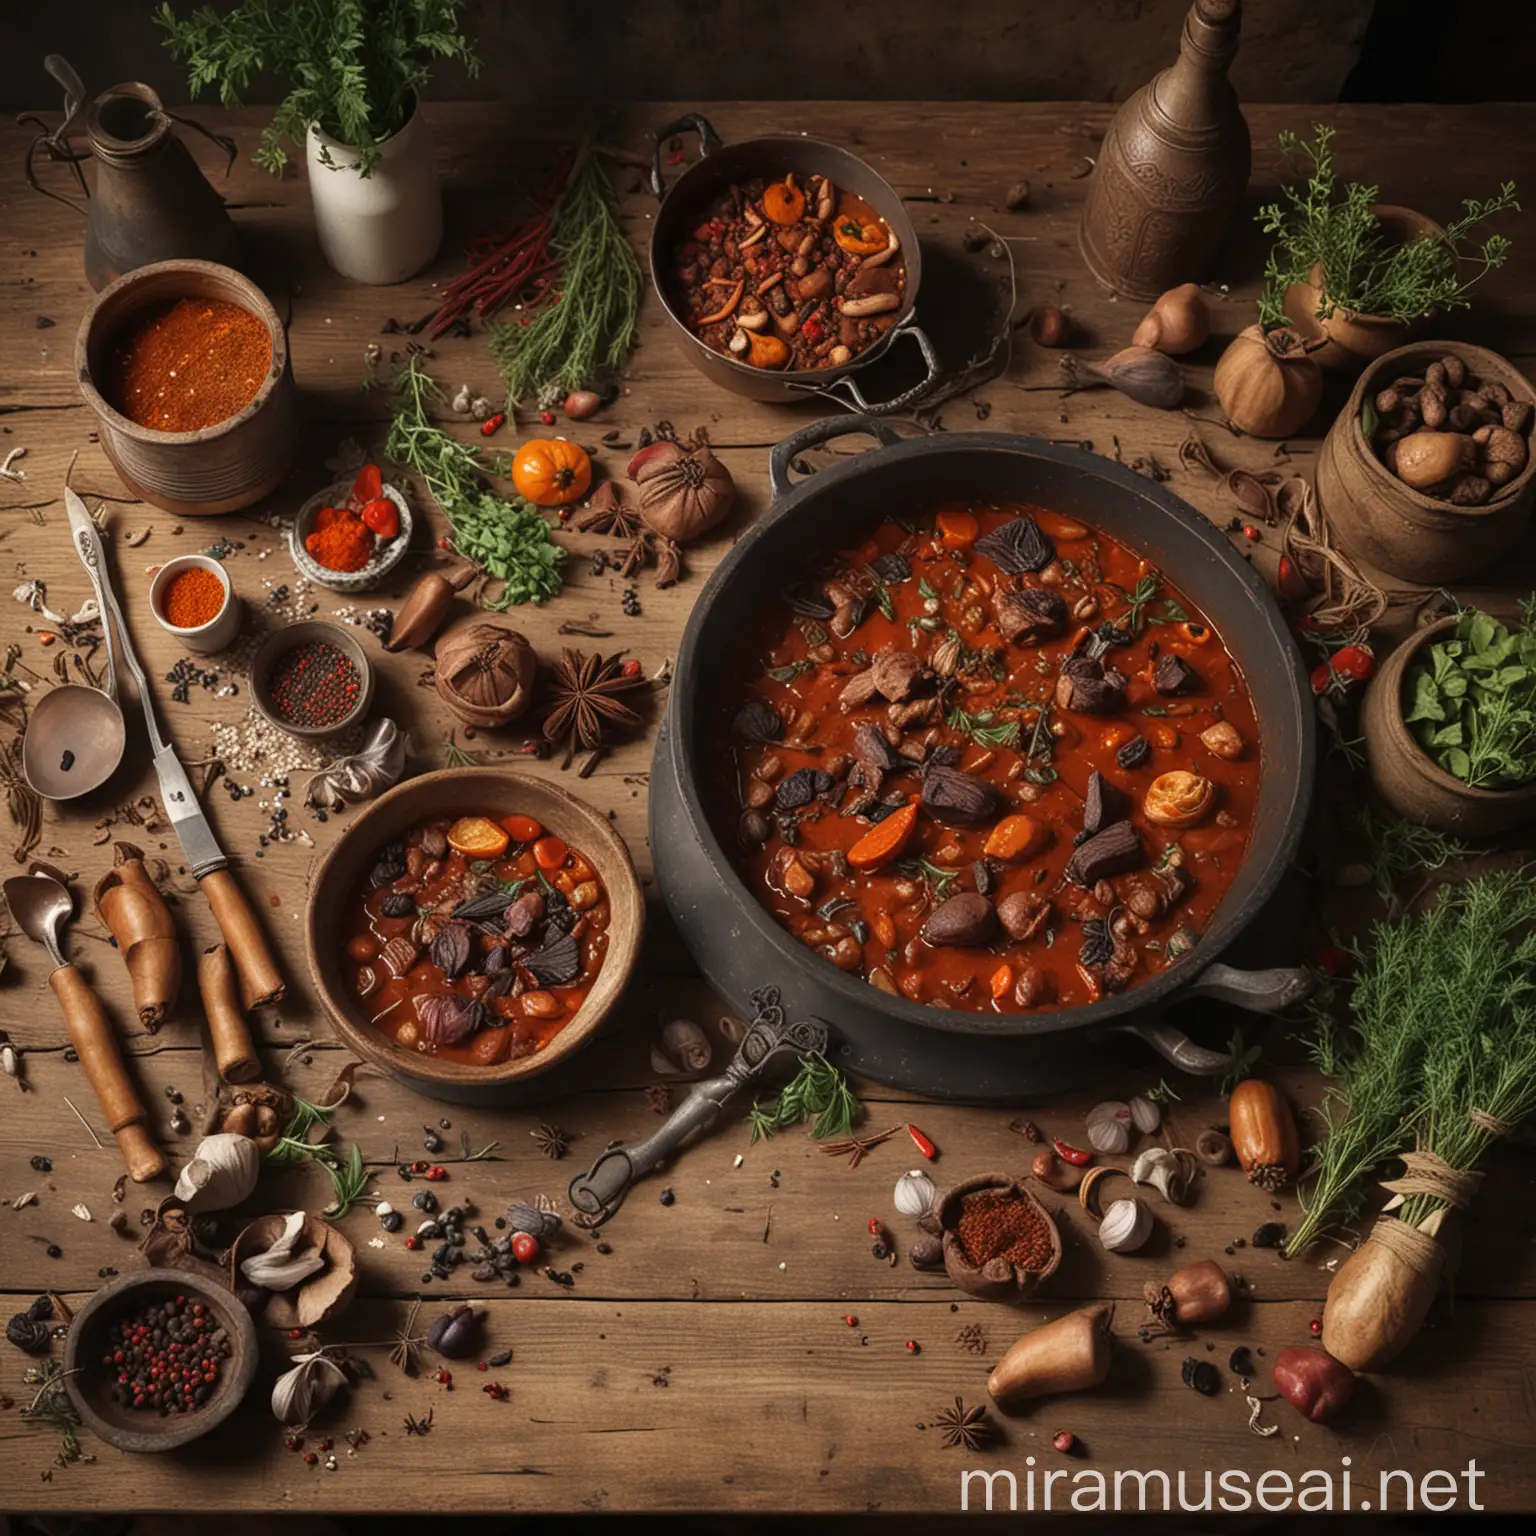 Gambo Stew and Marie Laveau Cooking in Rustic Bohemian Kitchen with Spices and Herbs